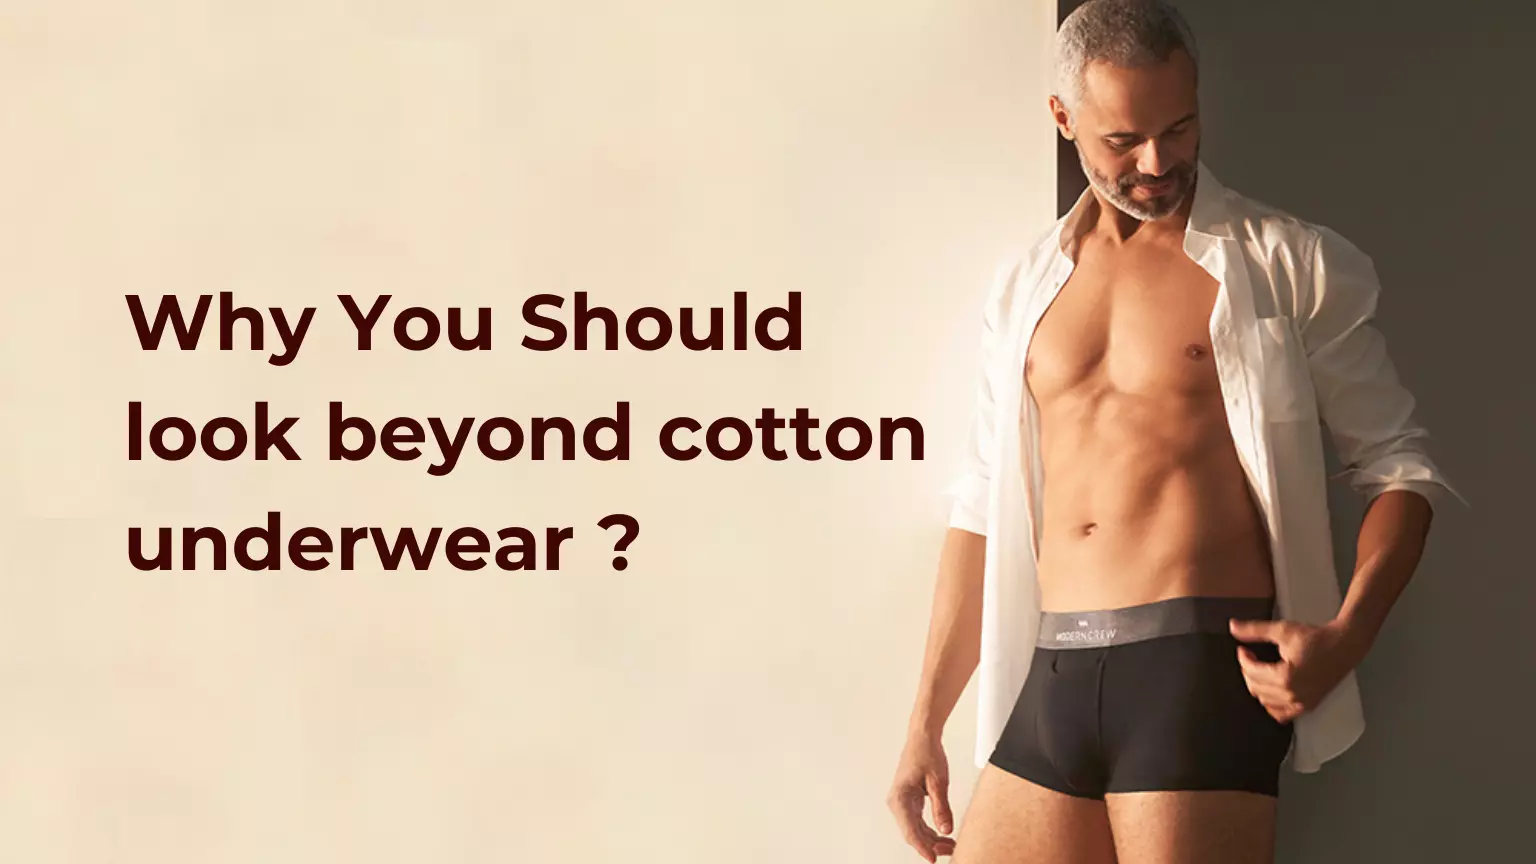 Explore a wide range of underwear that ensures comfort and free